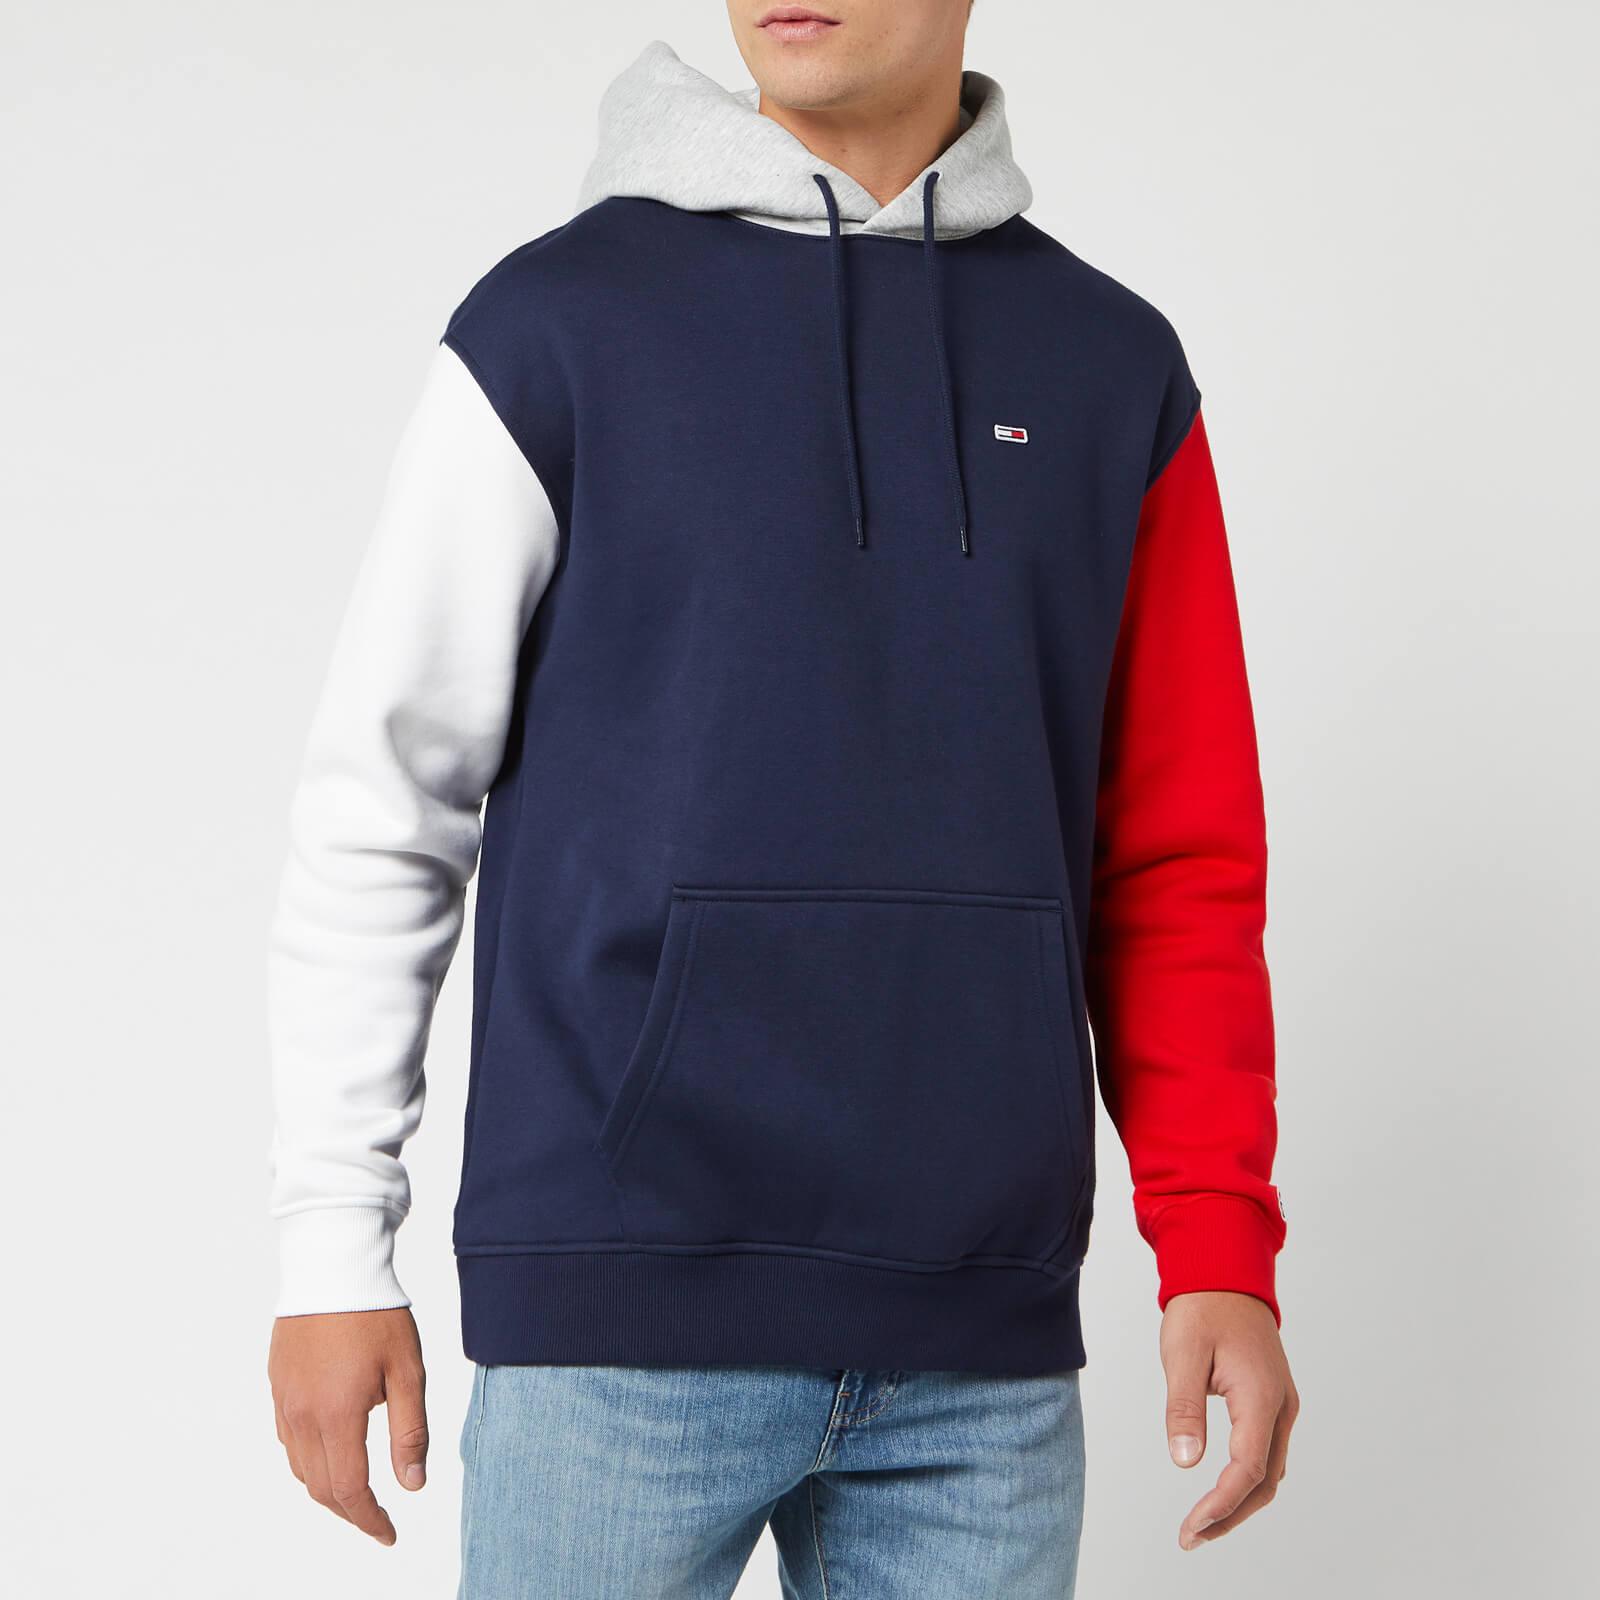 Tommy Hilfiger Colorblock Classic Hoodie in Blue for Men - Lyst